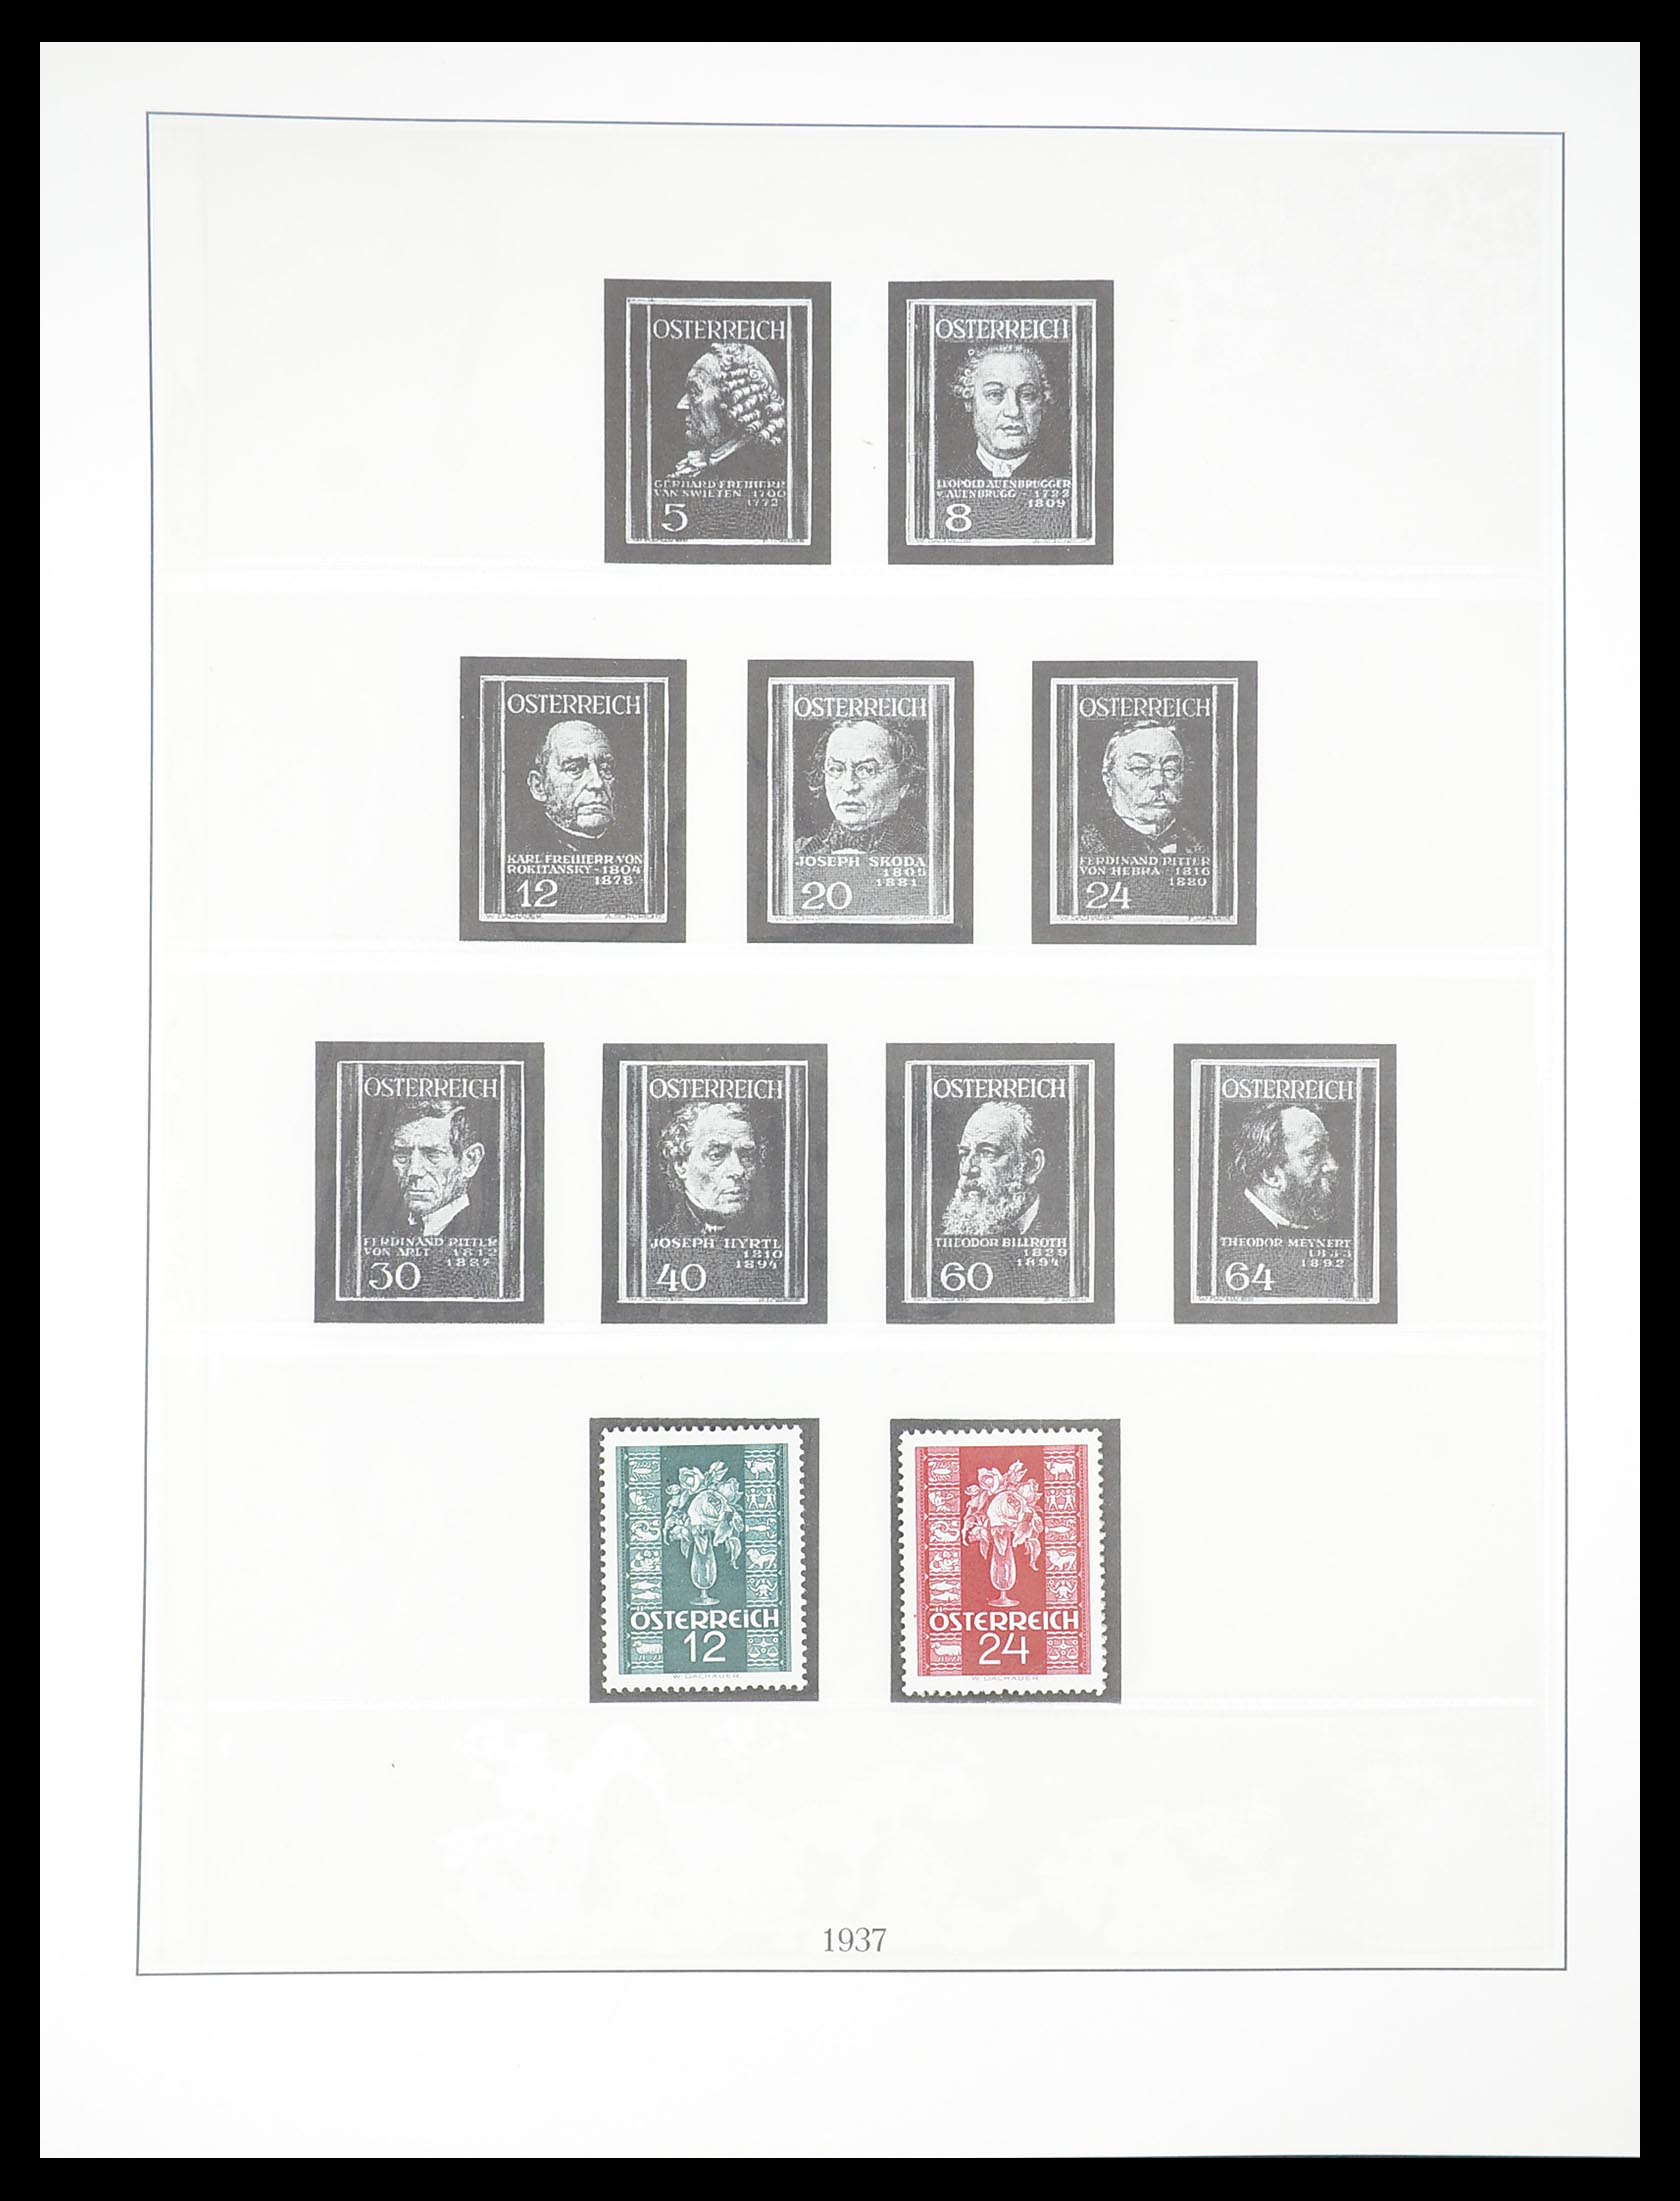 33189 084 - Stamp collection 33189 European countries 1850-1950.